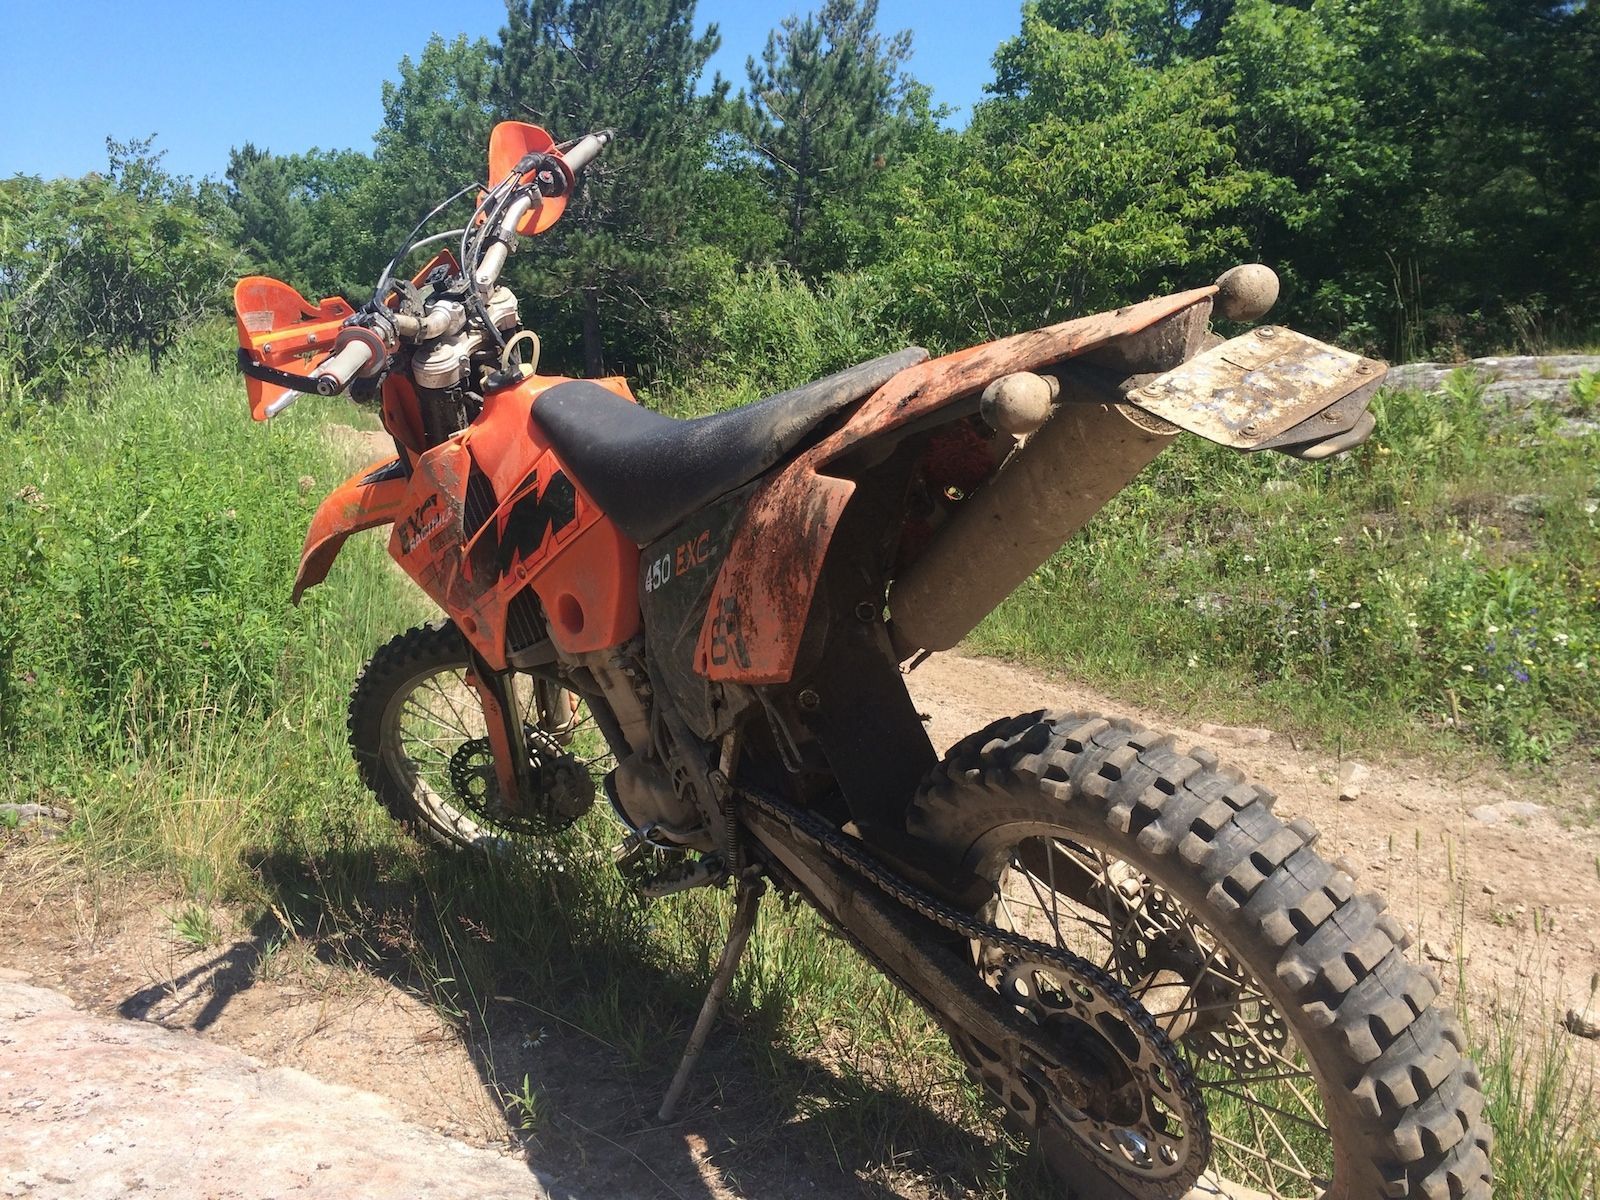 Sometimes, we all need a dirty girl - My KTM450 is certainly that